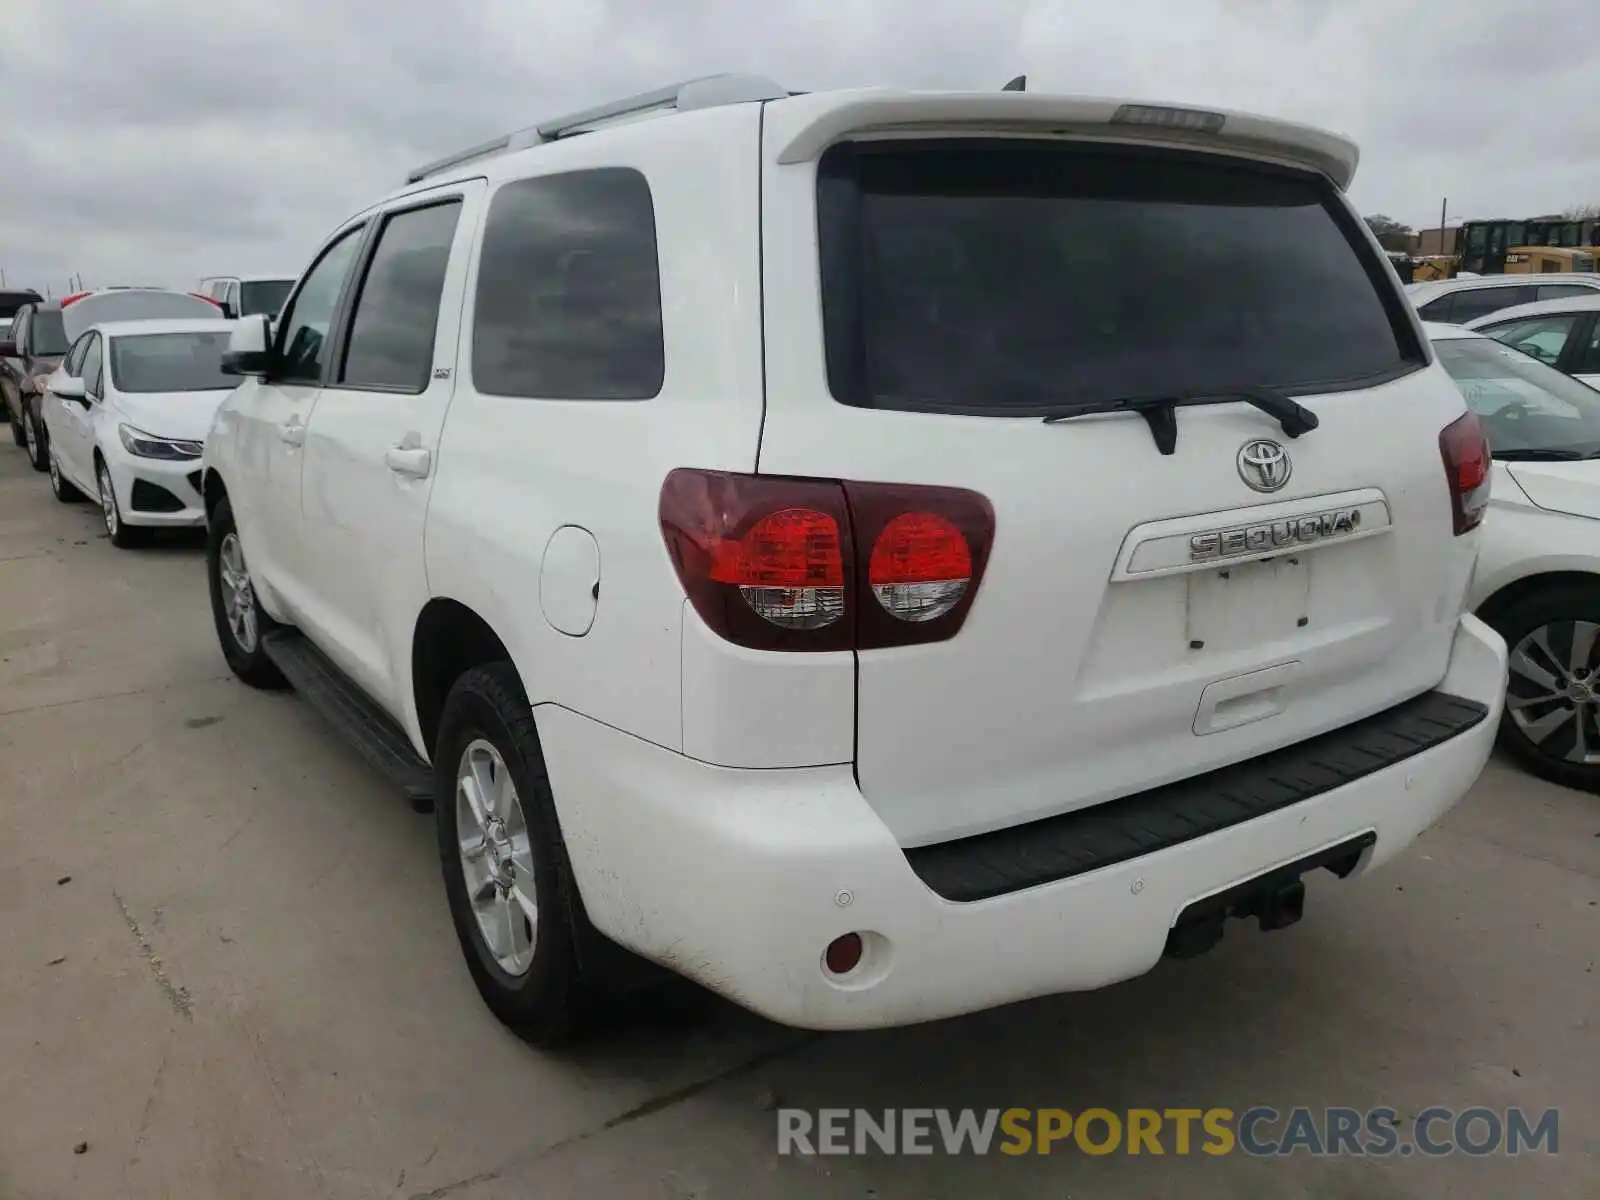 3 Photograph of a damaged car 5TDBY5G18KS170068 TOYOTA SEQUOIA 2019